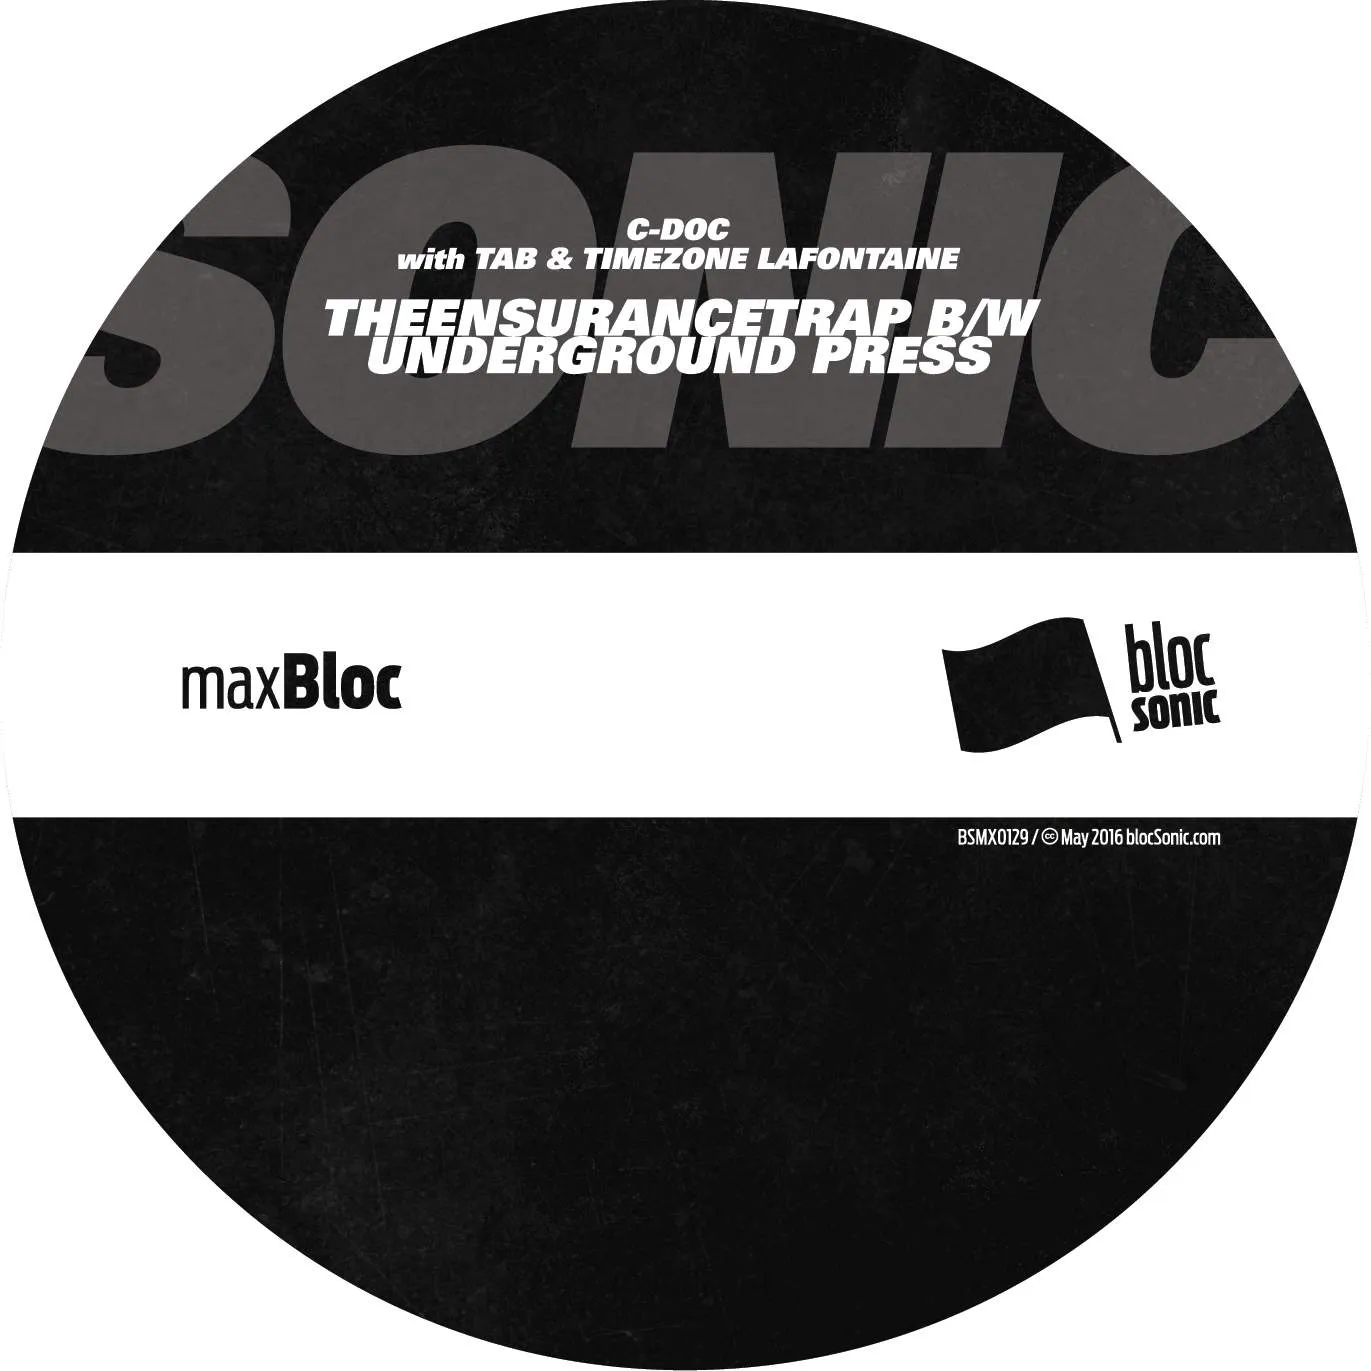 Album disc for “TheEnsuranceTrap b/w Underground Press” by C-Doc